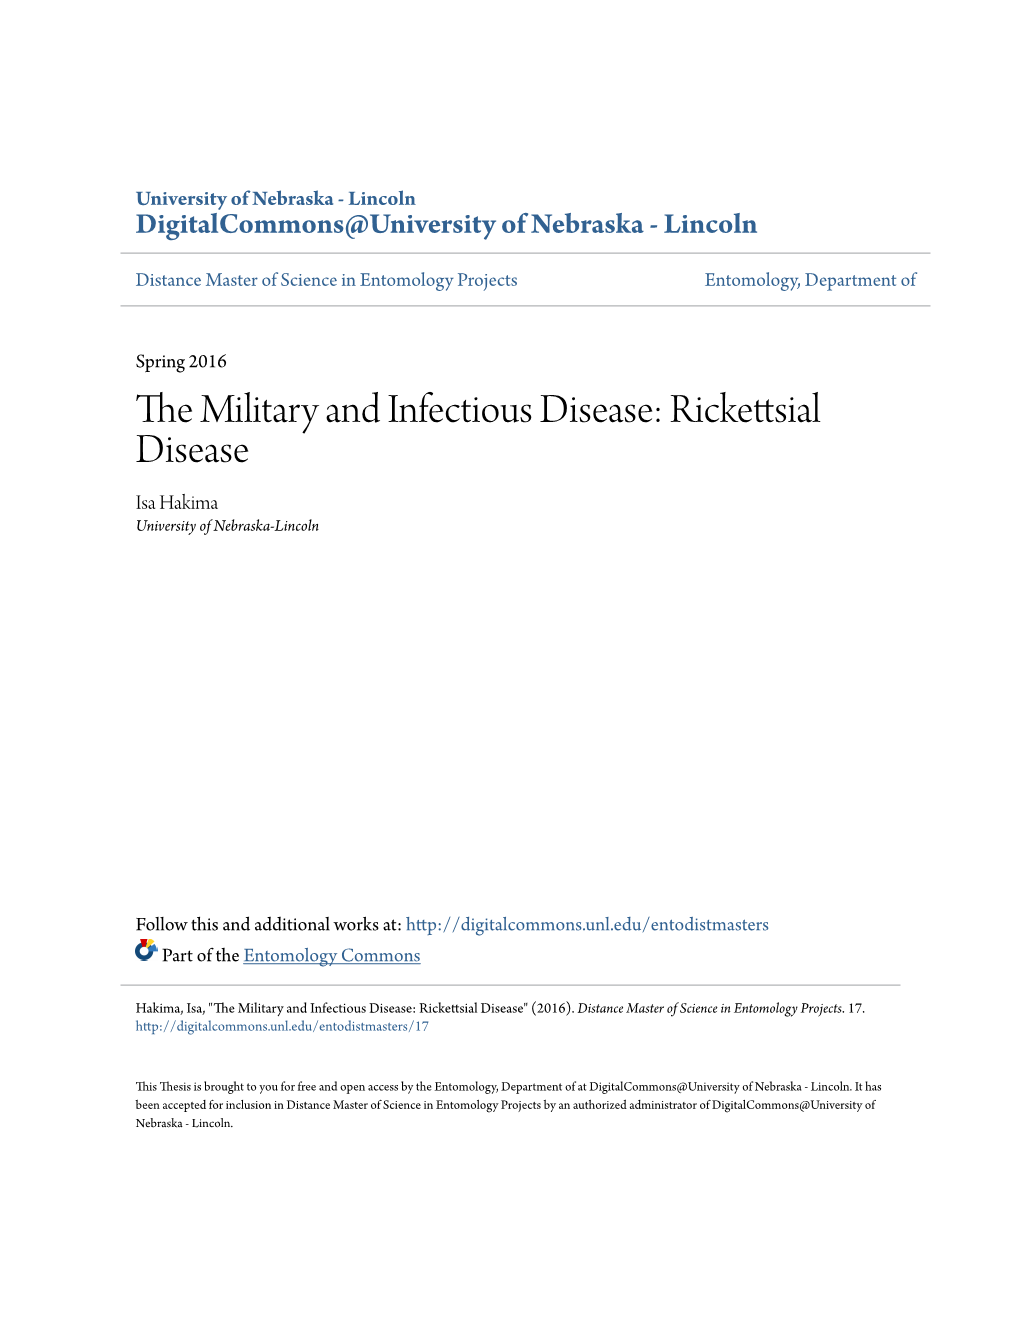 The Military and Infectious Disease: Rickettsial Disease